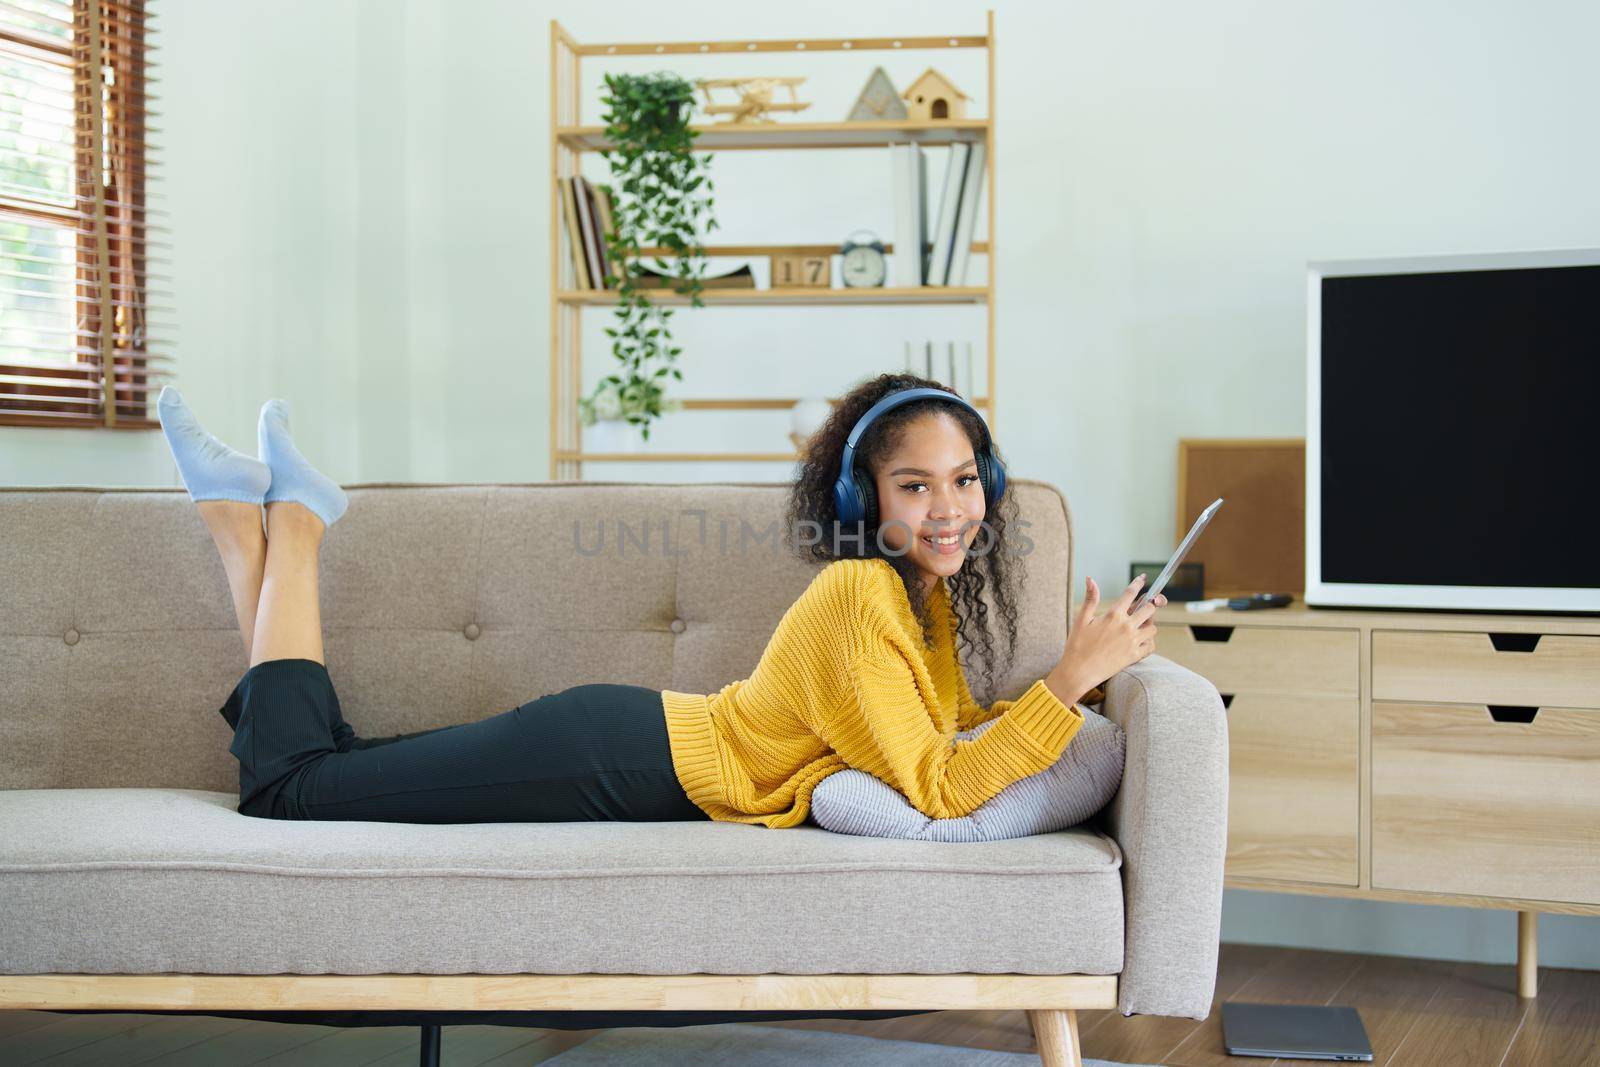 Portrait of an African American with headphones and tablet smiling happily listen music while relaxing on the sofa at home.